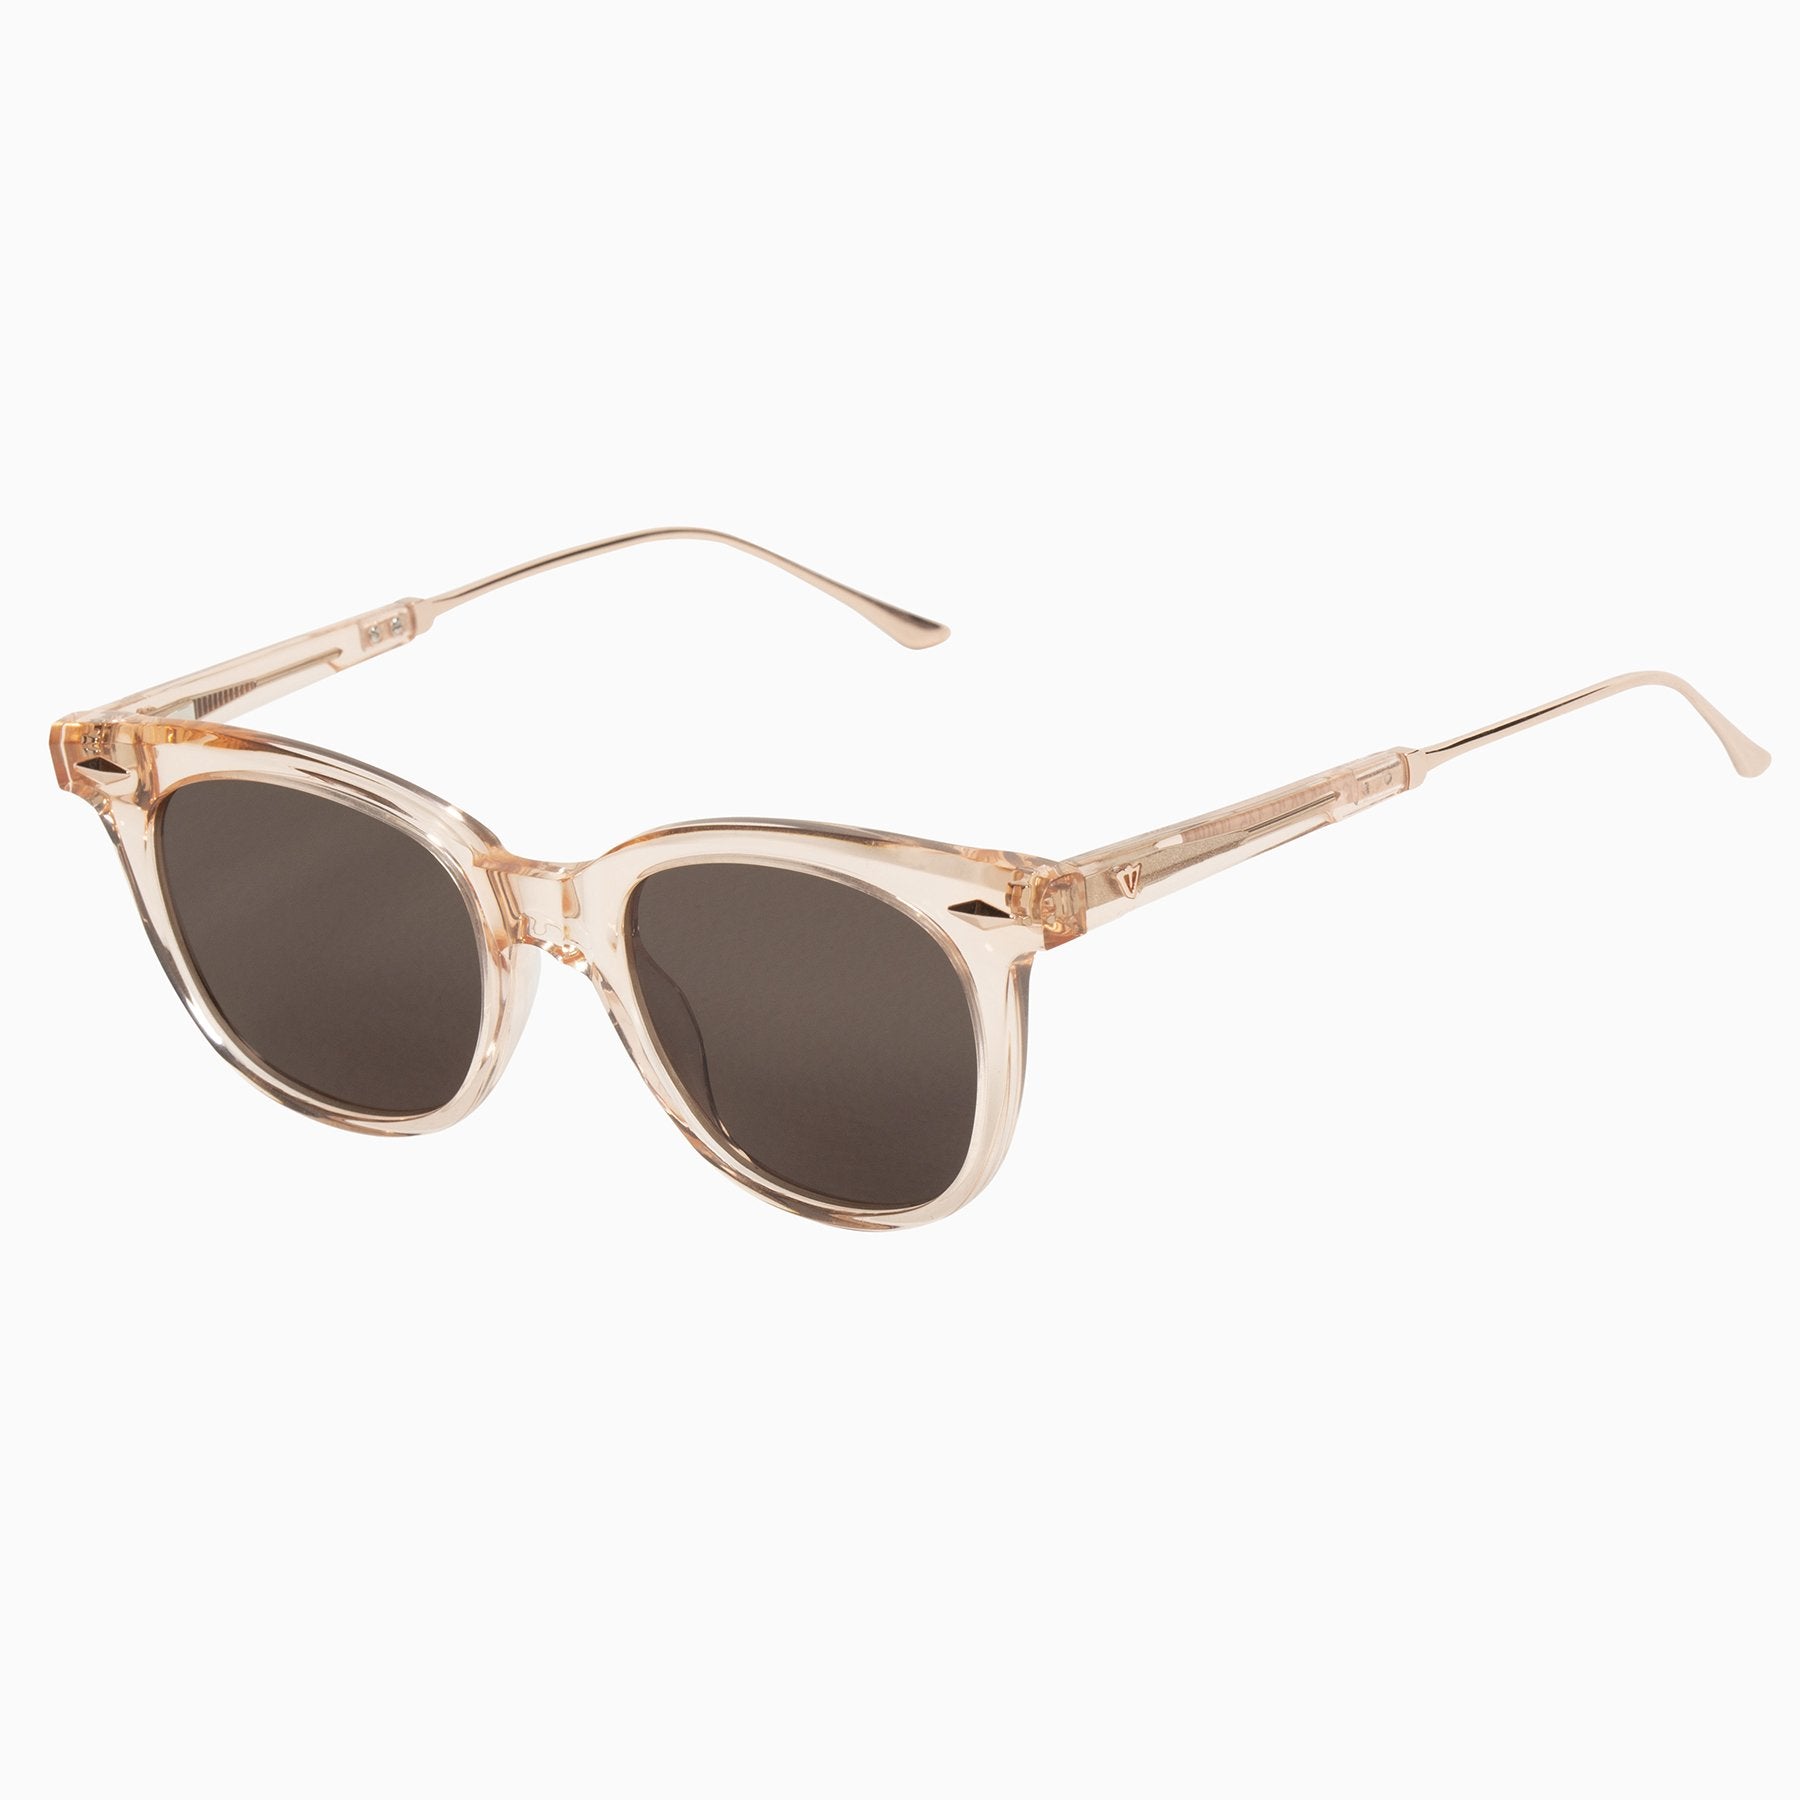 Mercy | Sunglasses - Crystal Pink w. Rose Metal Trim / Clear Lens